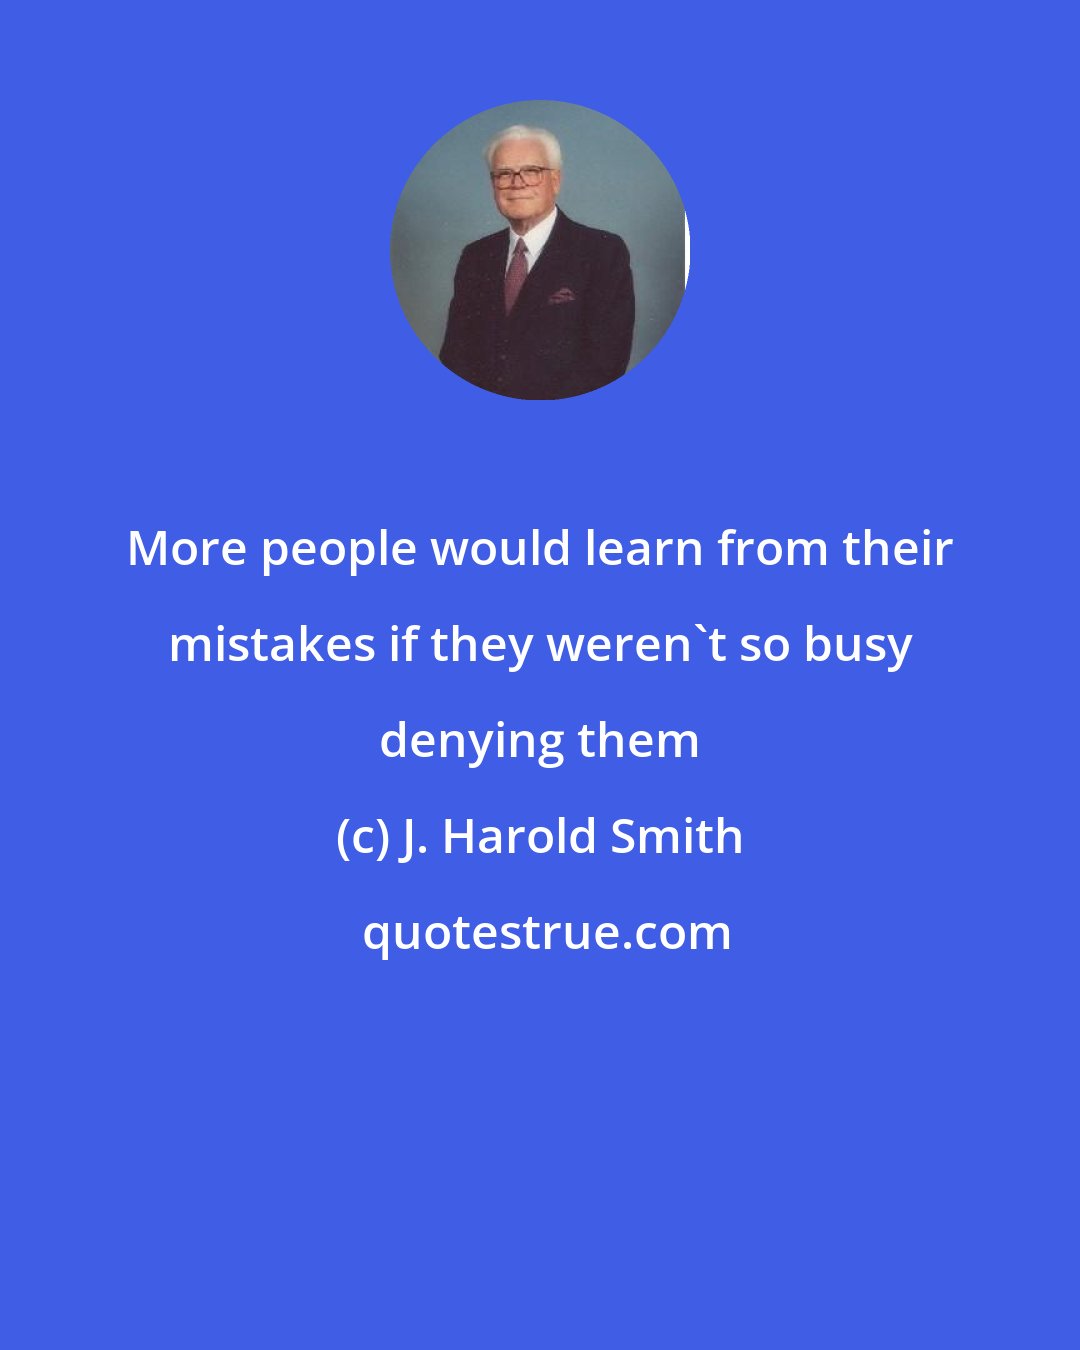 J. Harold Smith: More people would learn from their mistakes if they weren't so busy denying them